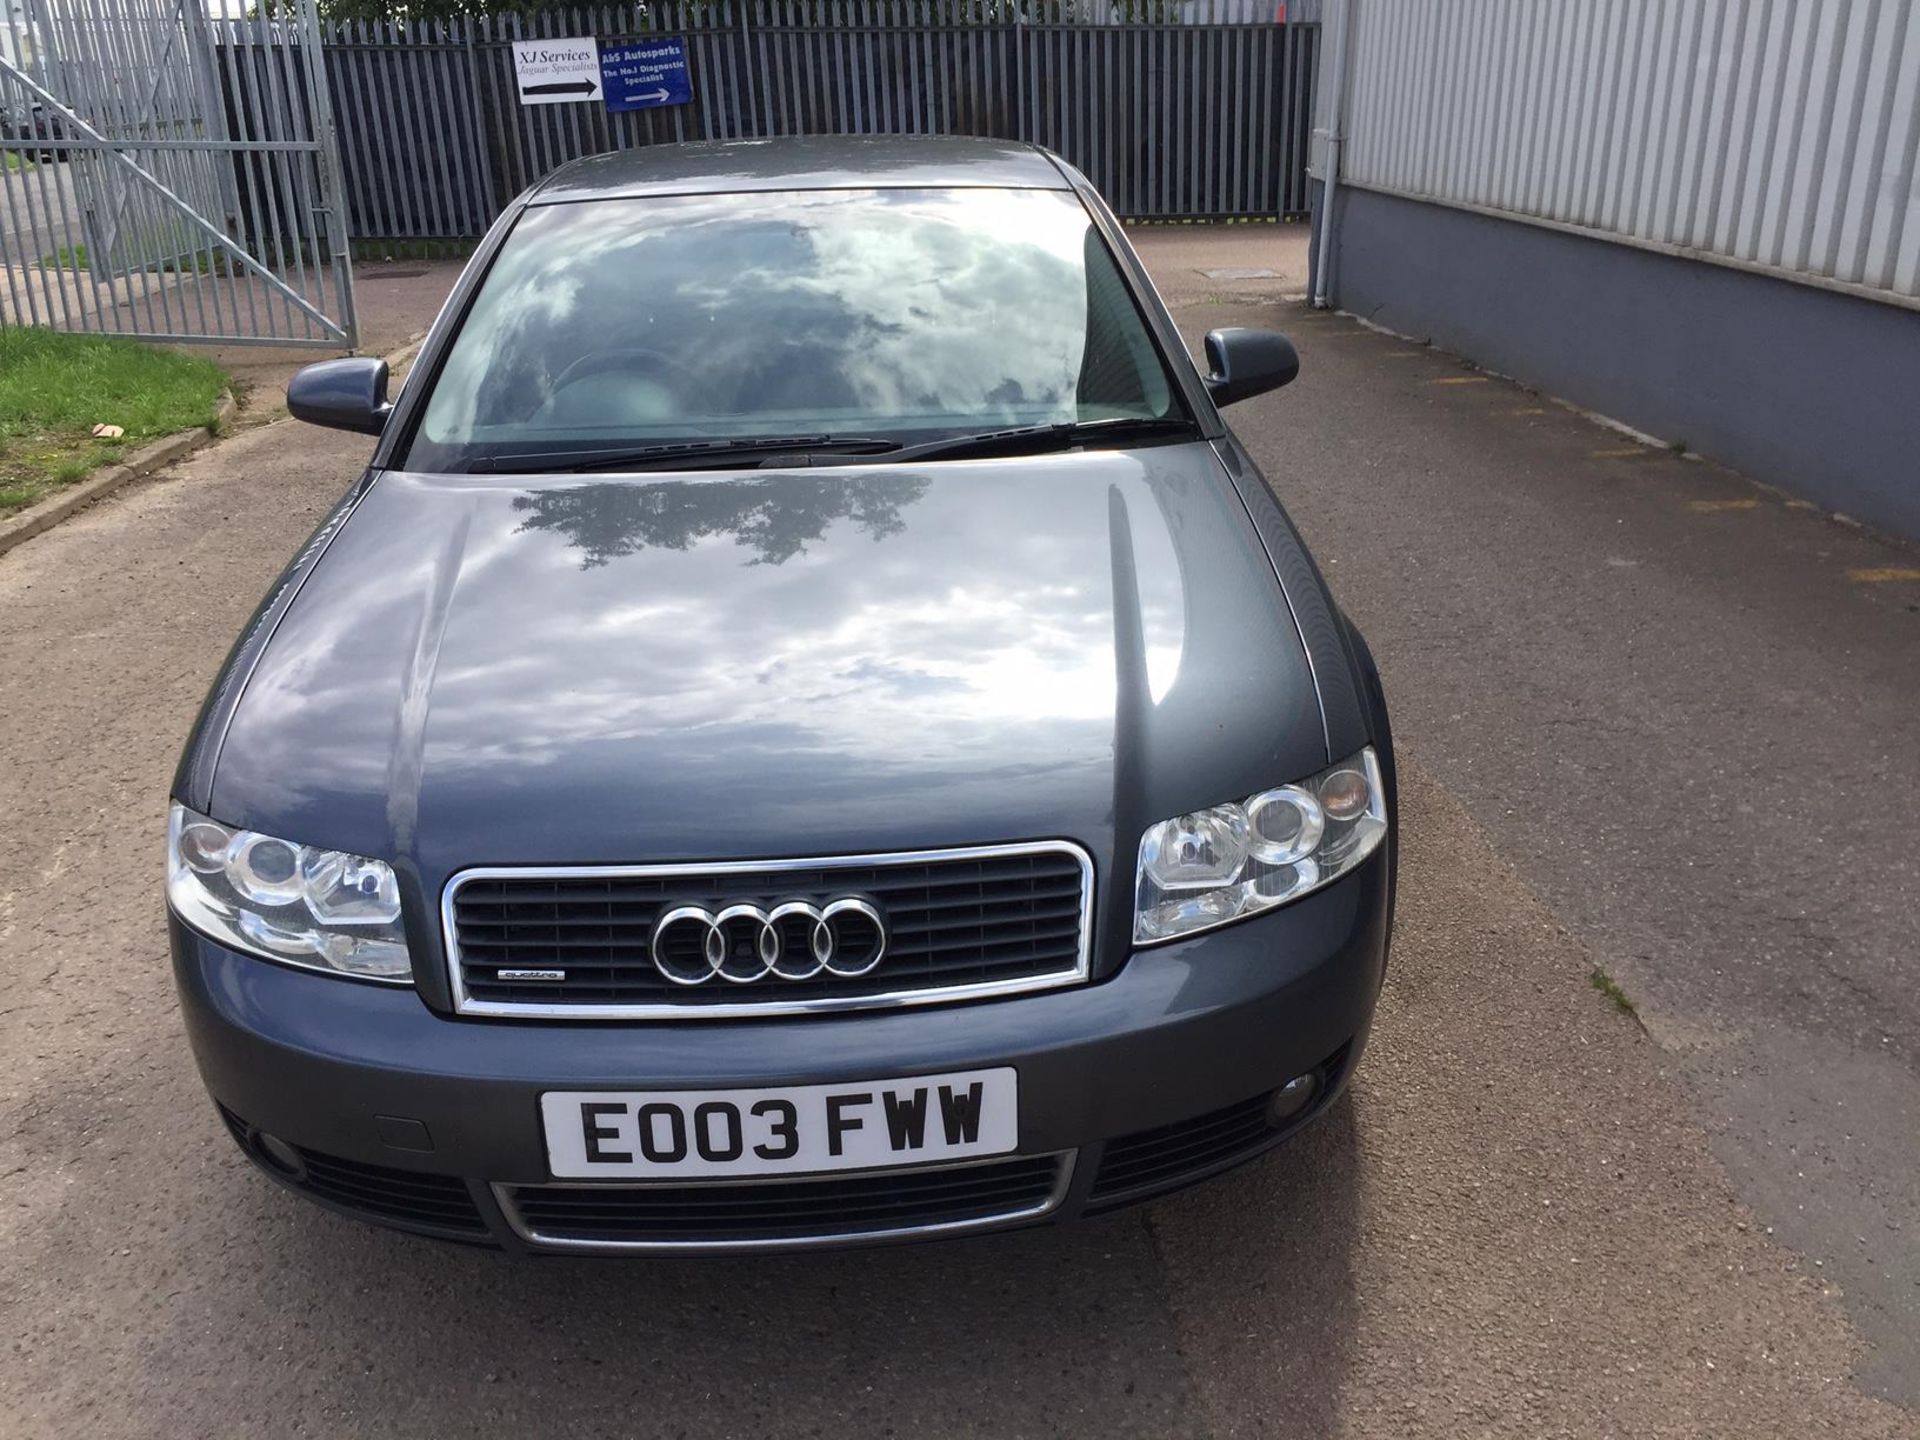 2003 Audi A4 Quattro 1.9 Tdi SE 4 Dr Saloon - CL505 - NO VAT ON THE HAMMER - Location: Corby, Northa - Image 10 of 15